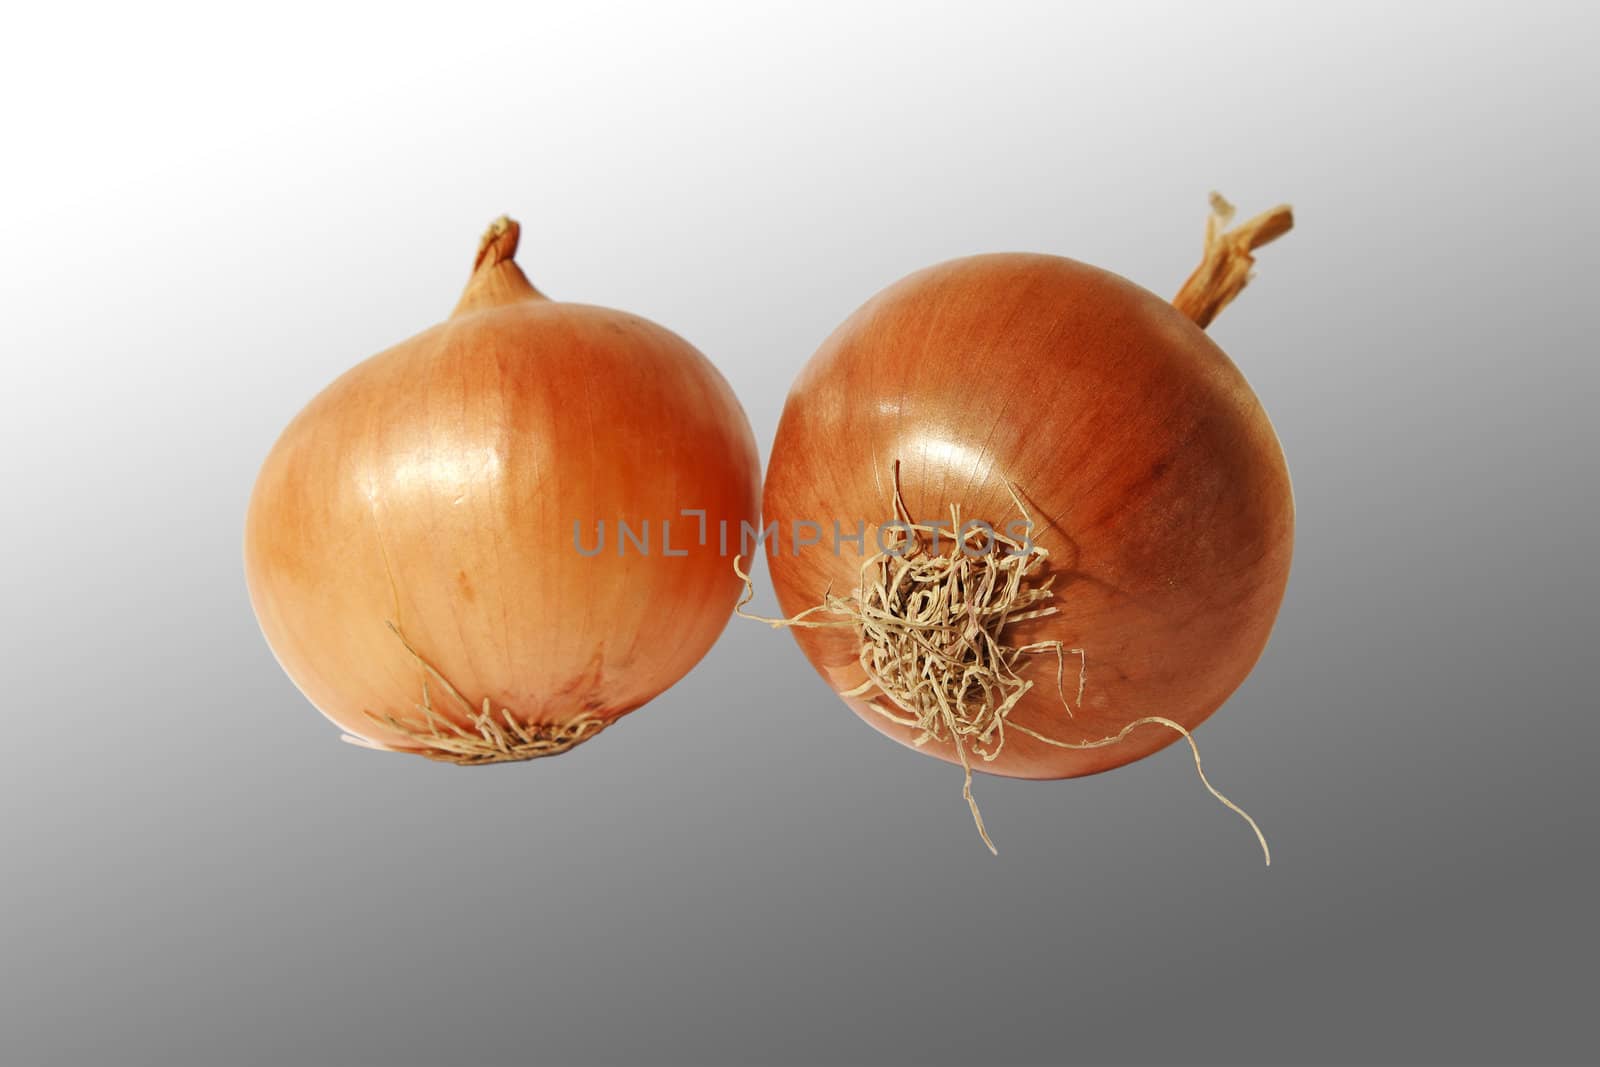 Two onions close to black and white background.